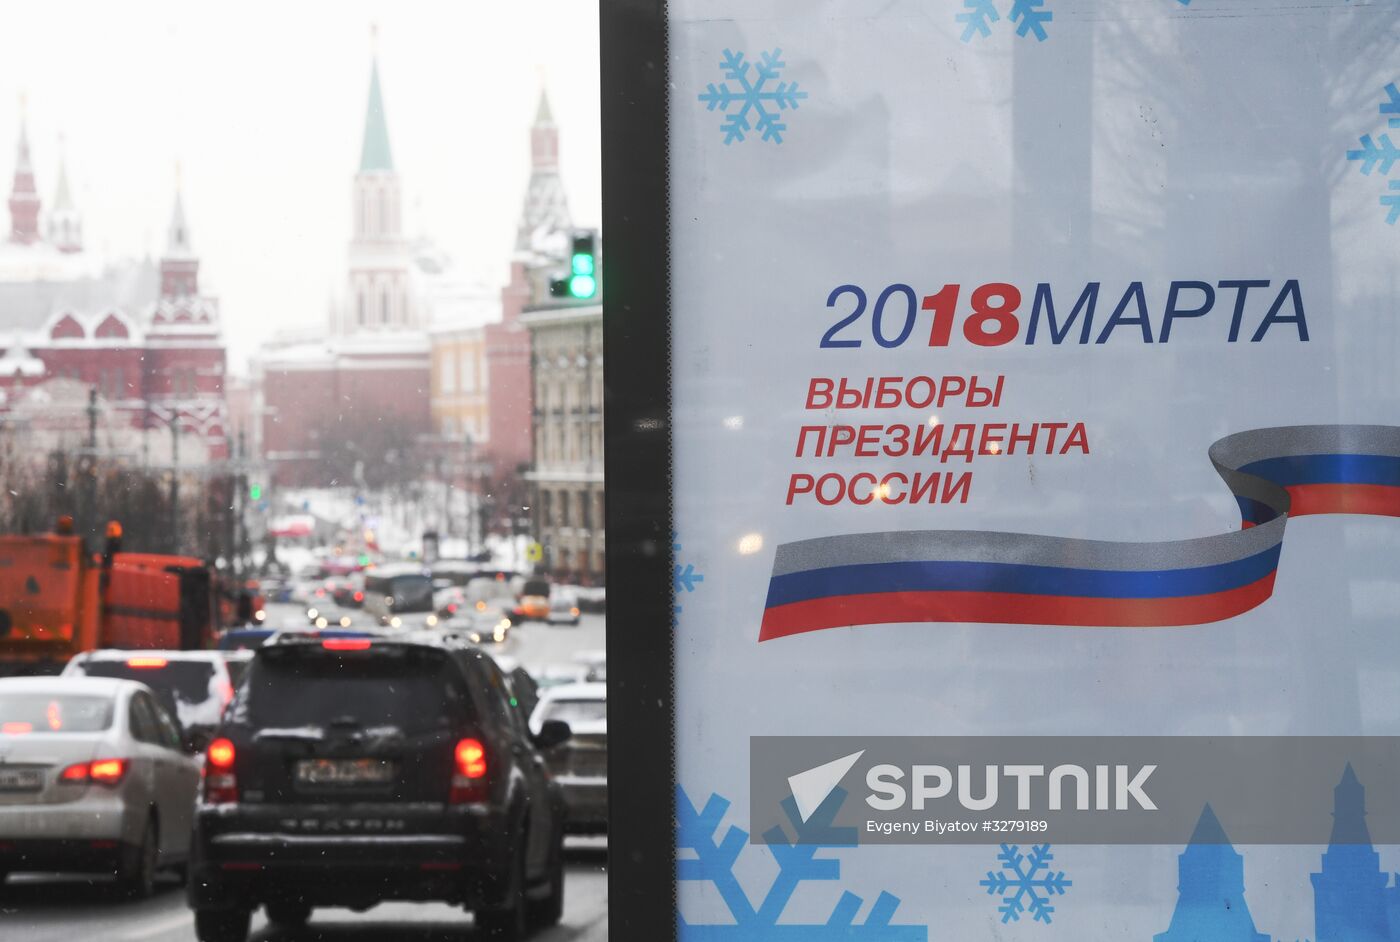 Presidential election campaign in Moscow